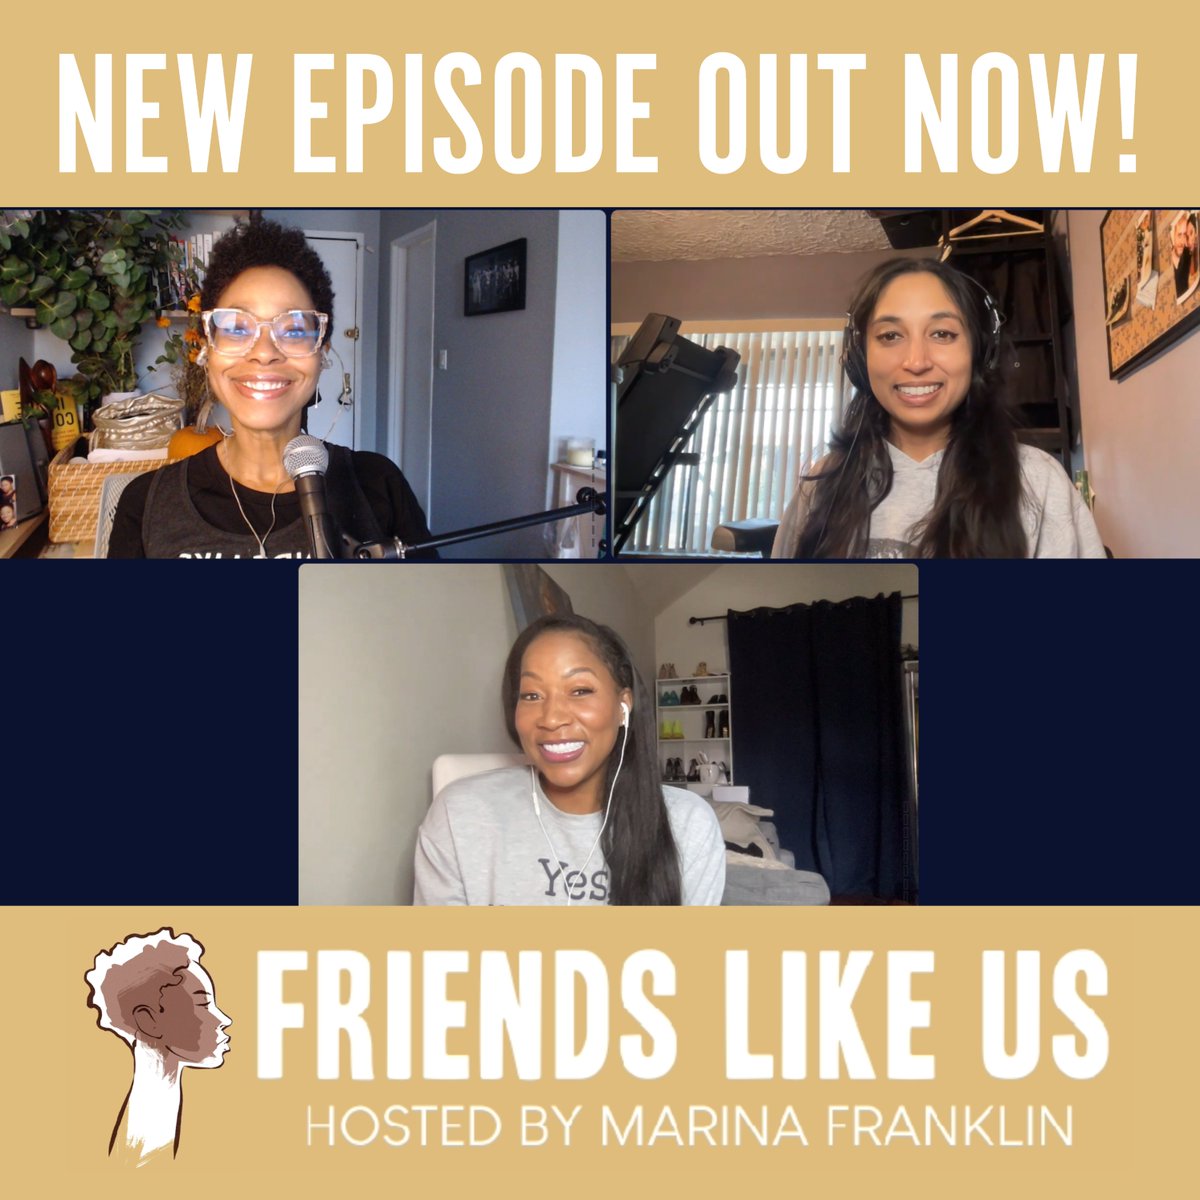 NEW CONTENT ALERT! Join us on this #FriendsLikeUs day with host @marinayfranklin & friends @VanessaFraction and @Subhah for a great convo on #diasterflights #socialmediacomics & more! #ListenNow here! ow.ly/AIxw50Jr4NV Be sure to leave a review on #ApplePodcasts!